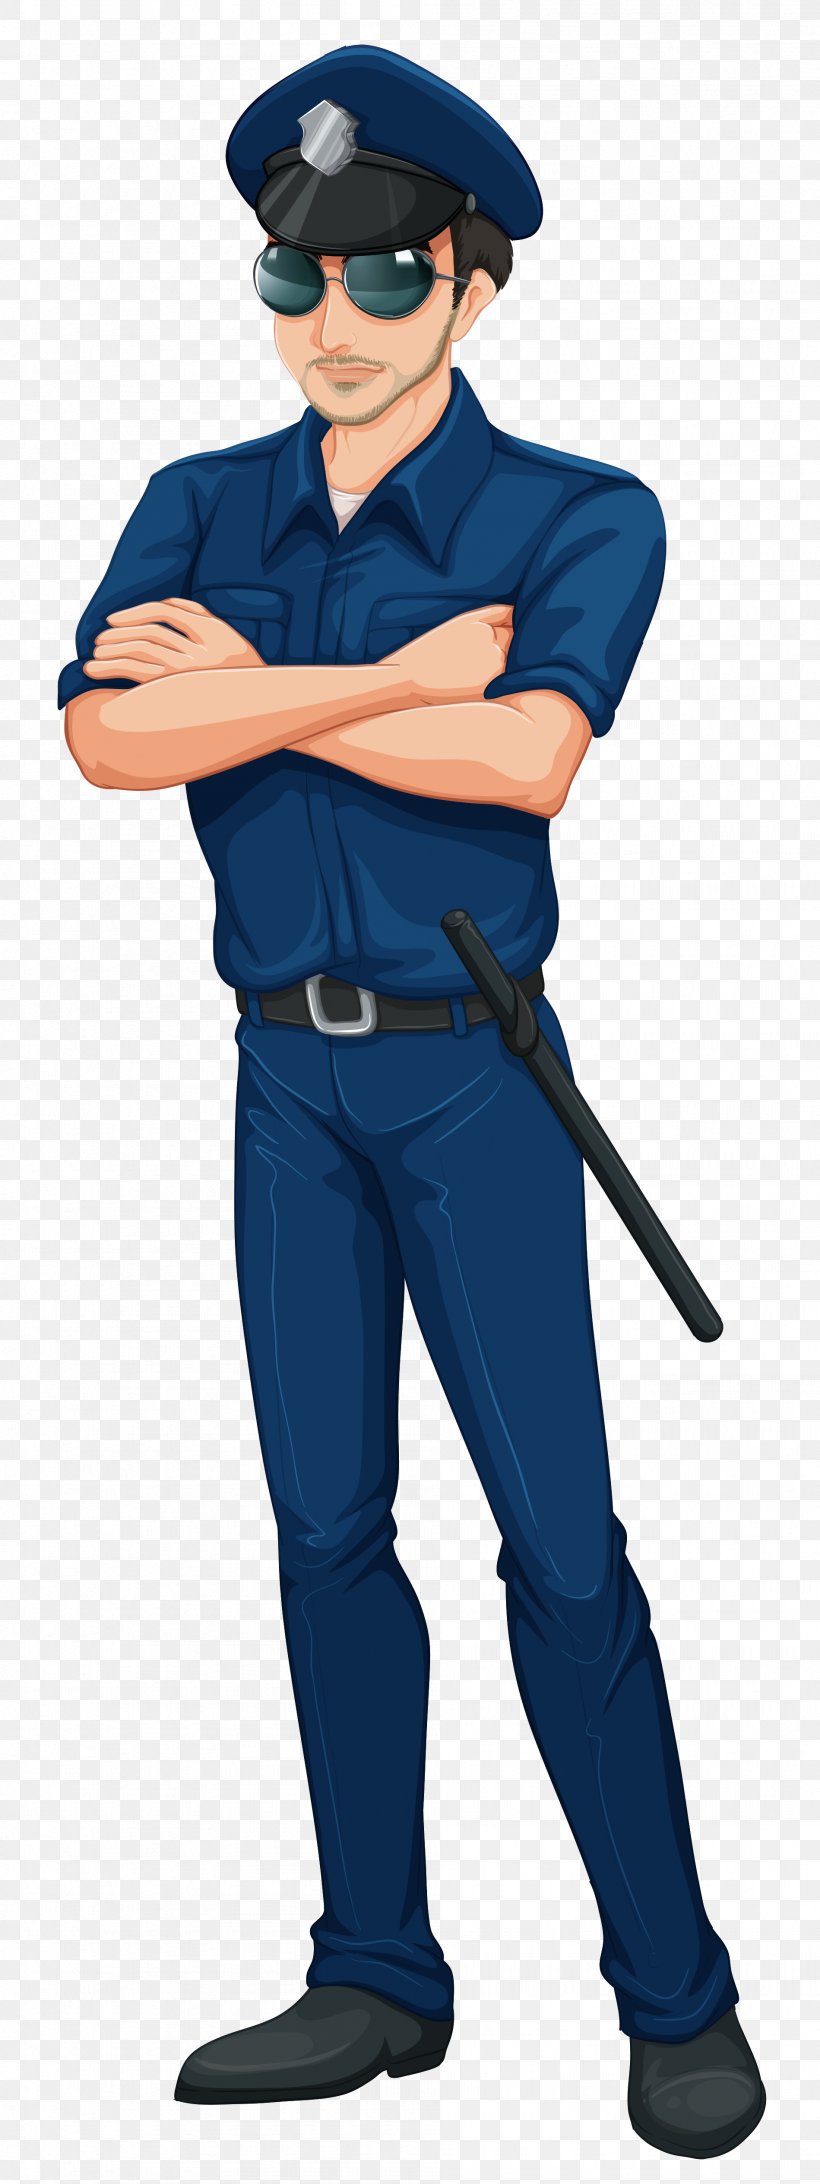 Police Officer Royal Canadian Mounted Police Illustration, PNG, 1899x5059px, Police Officer, Baseball Bat, Baseball Equipment, Crime, Electric Blue Download Free